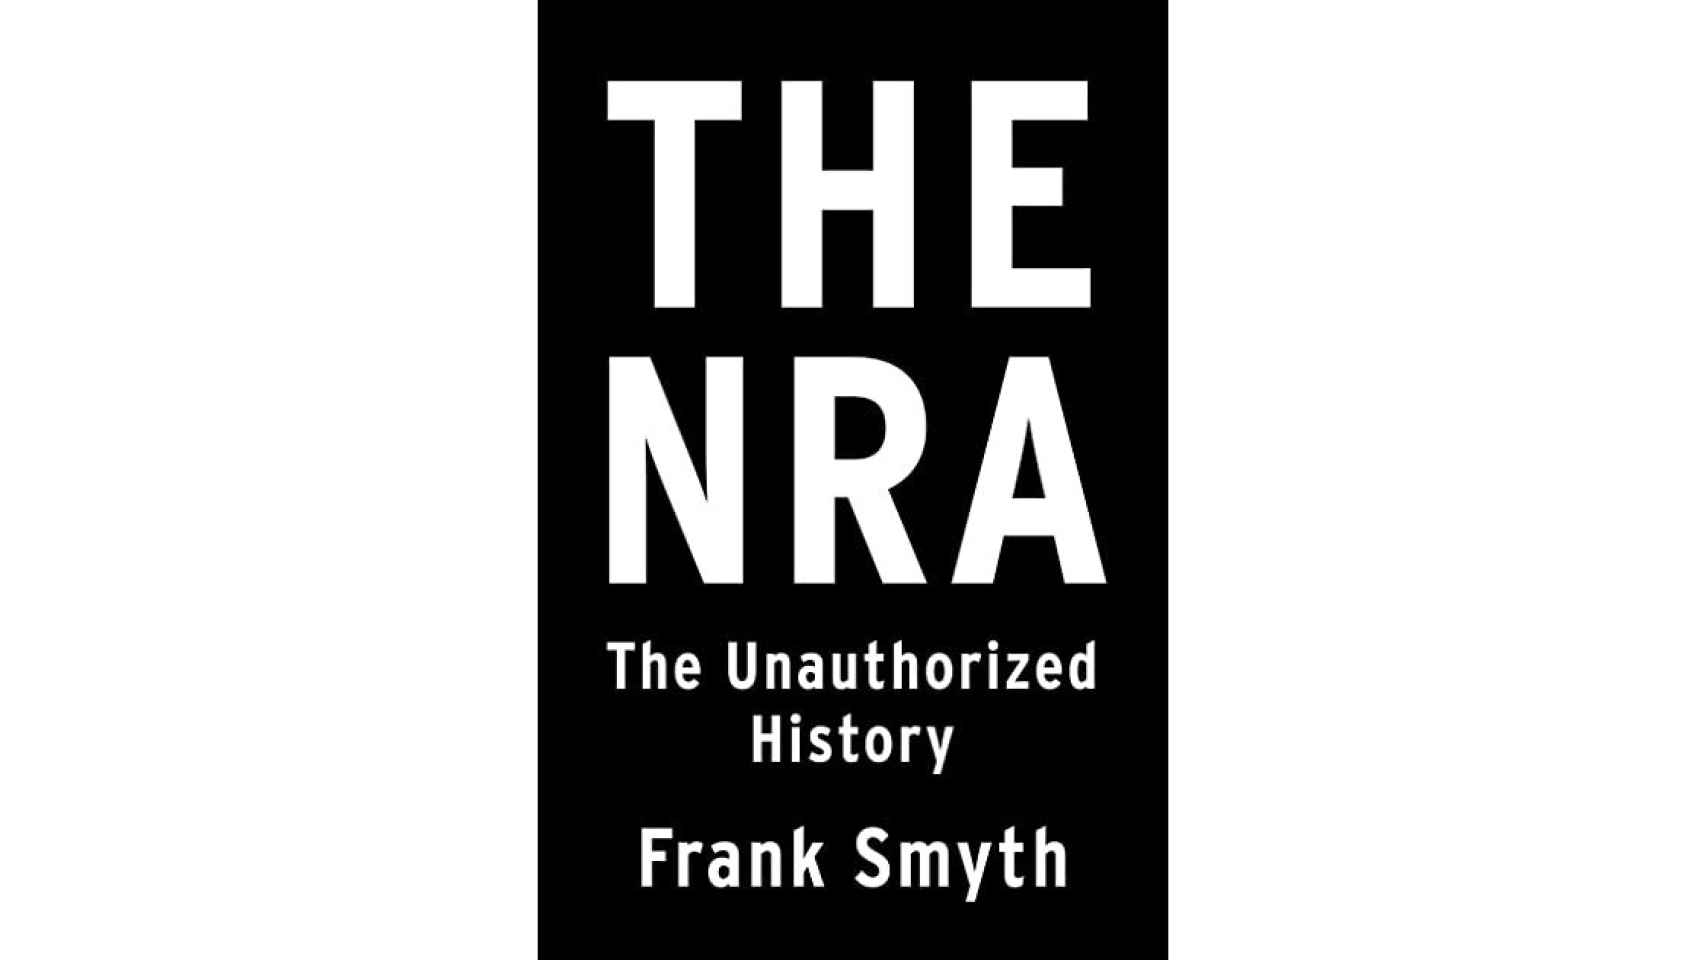 The NRA, The Unauthorized History.